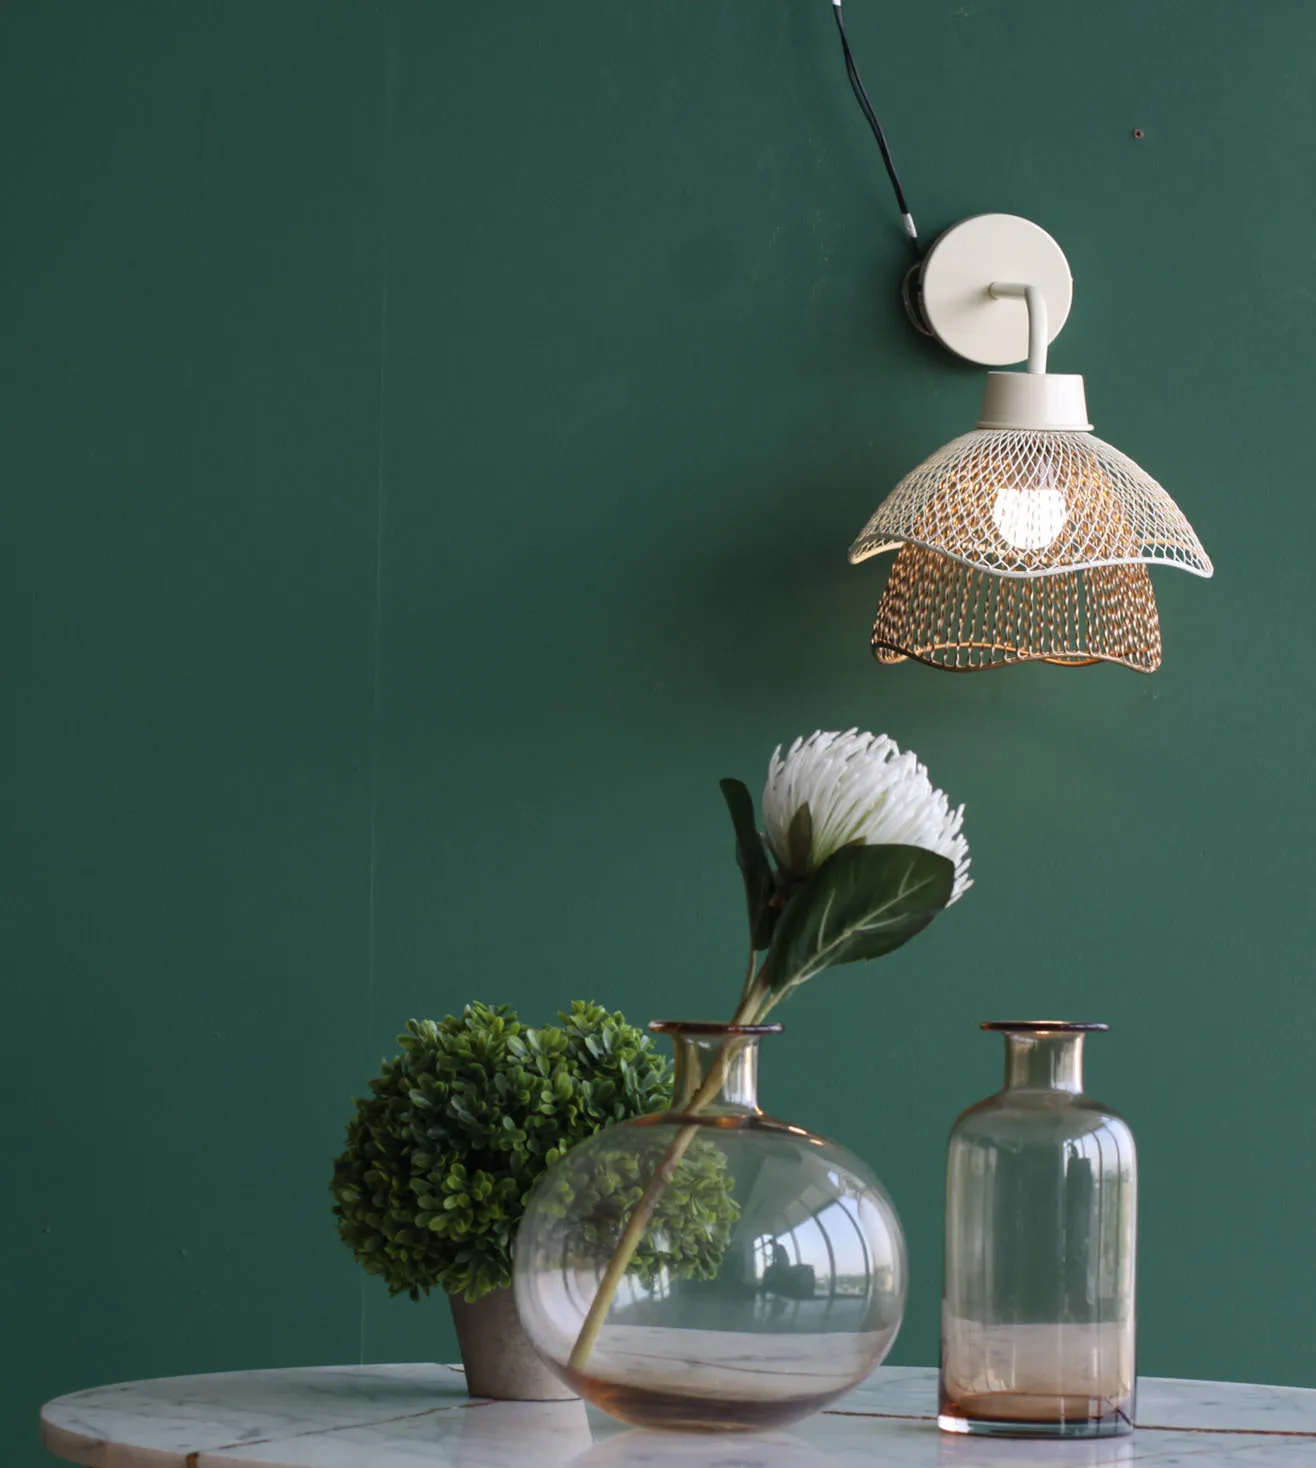 beautiful lamp, with a bulb in centre and elegant net structure around